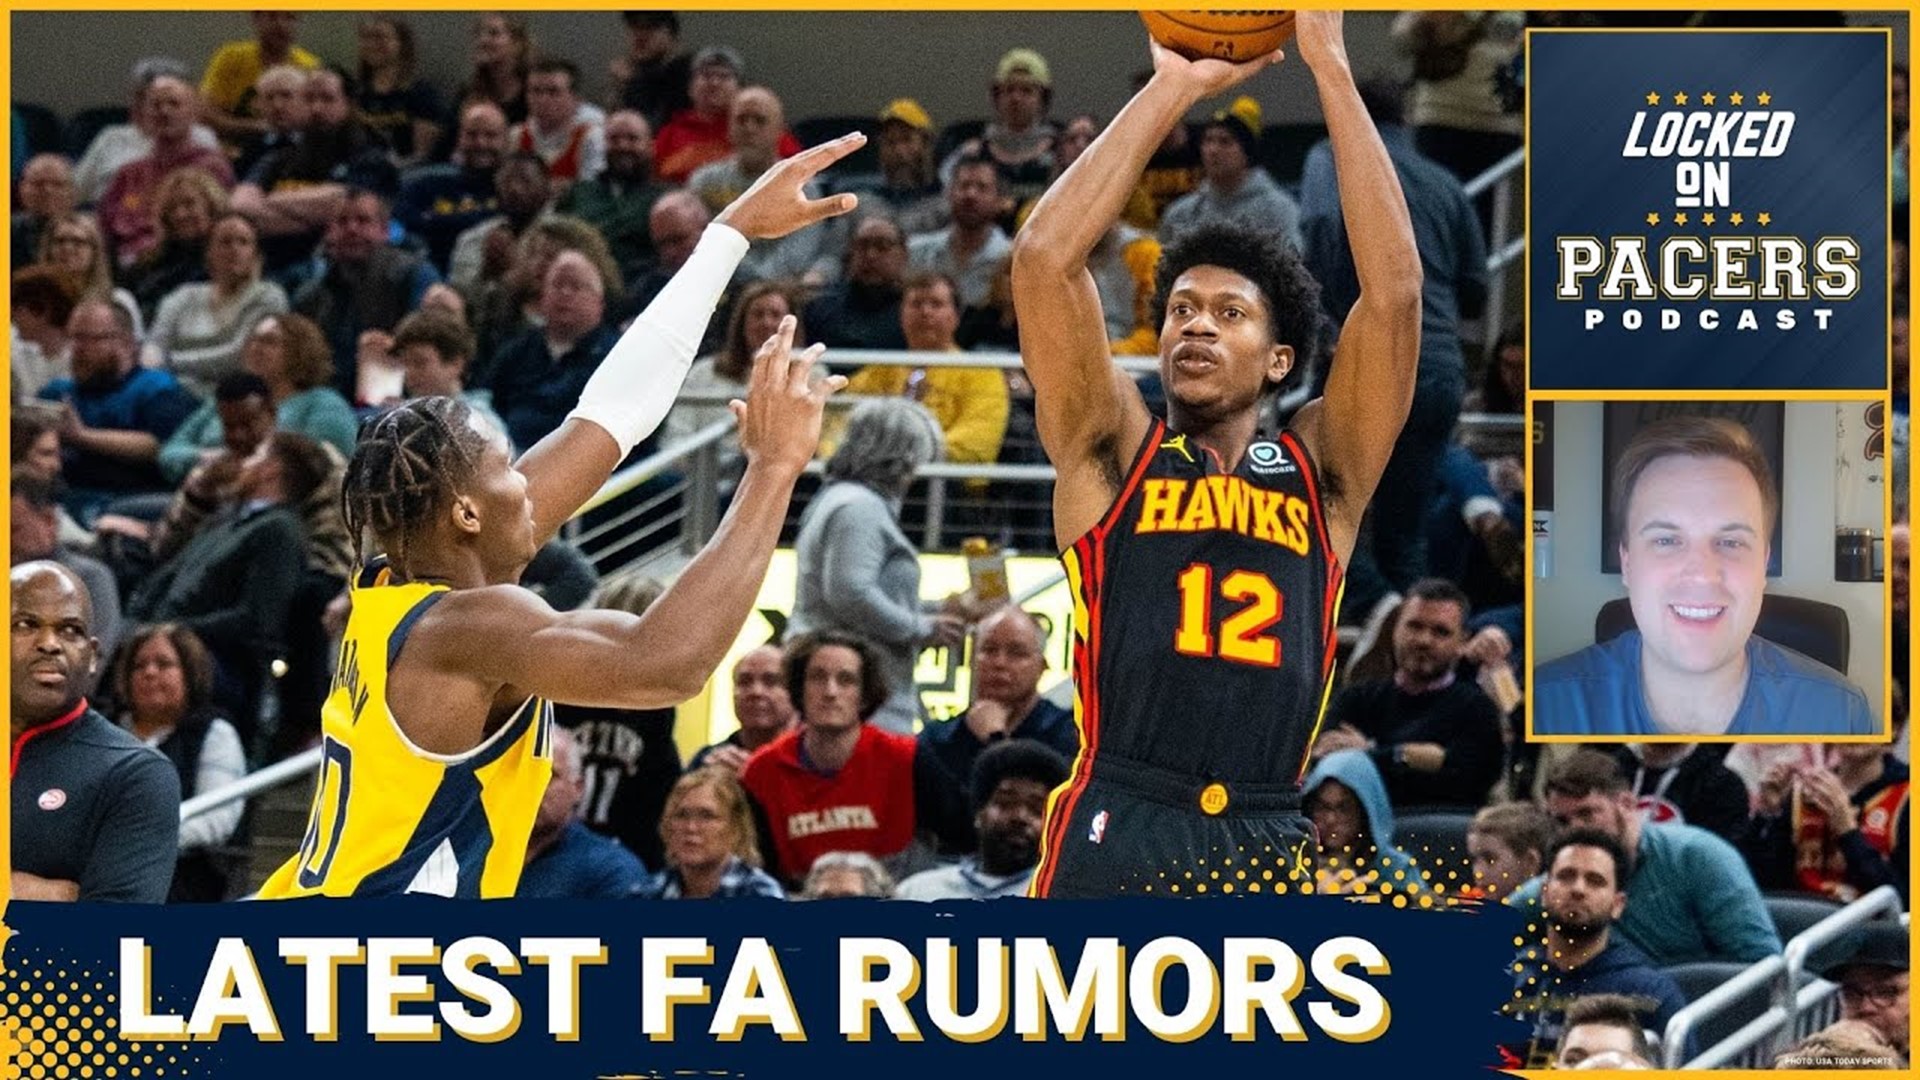 Indiana Pacers free agency rumors. From De'Andre Hunter to Grant Williams to Max Strus